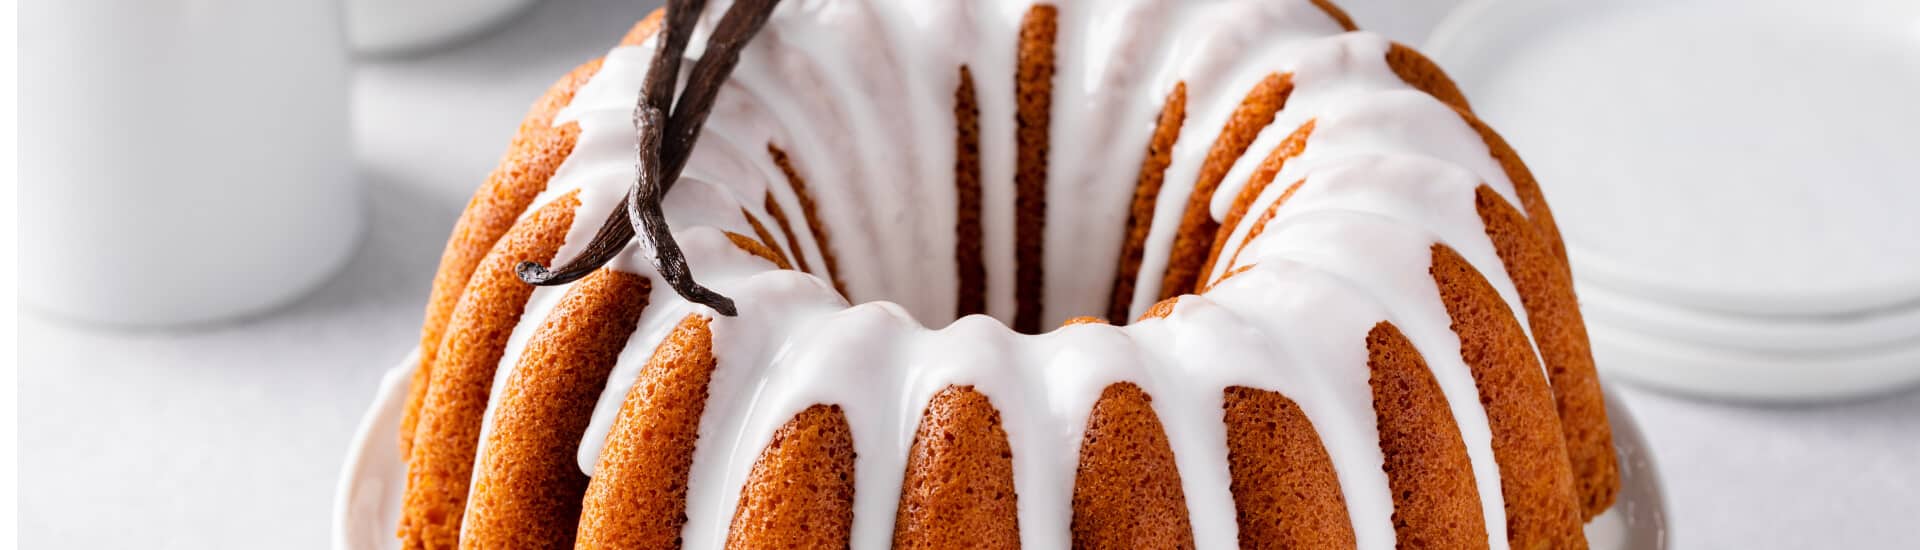 A bundt cake with white icing drizzling down the sides, and two whole vanilla beans on top.